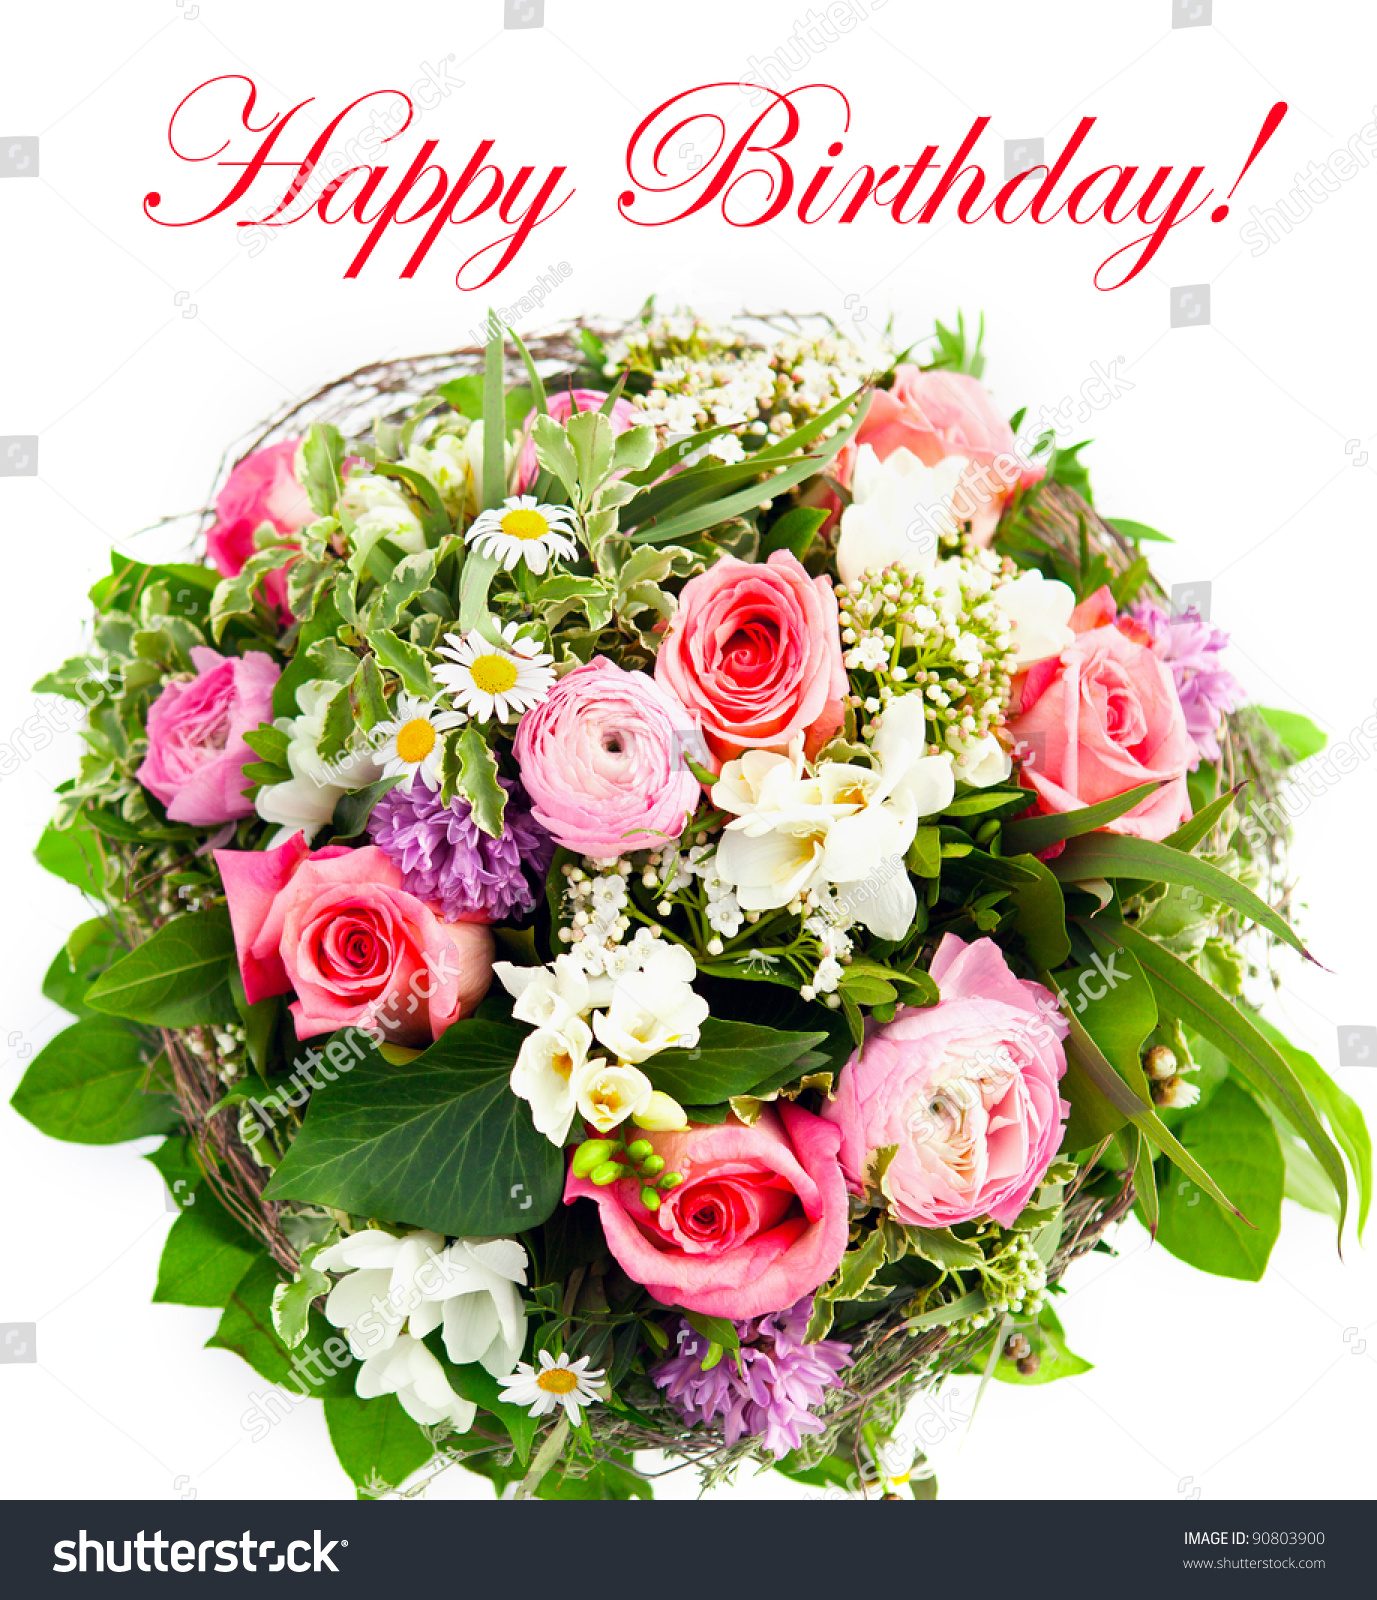 Happy Birthday Colorful Spring Flowers Bouquet Stock Photo 90803900 ...